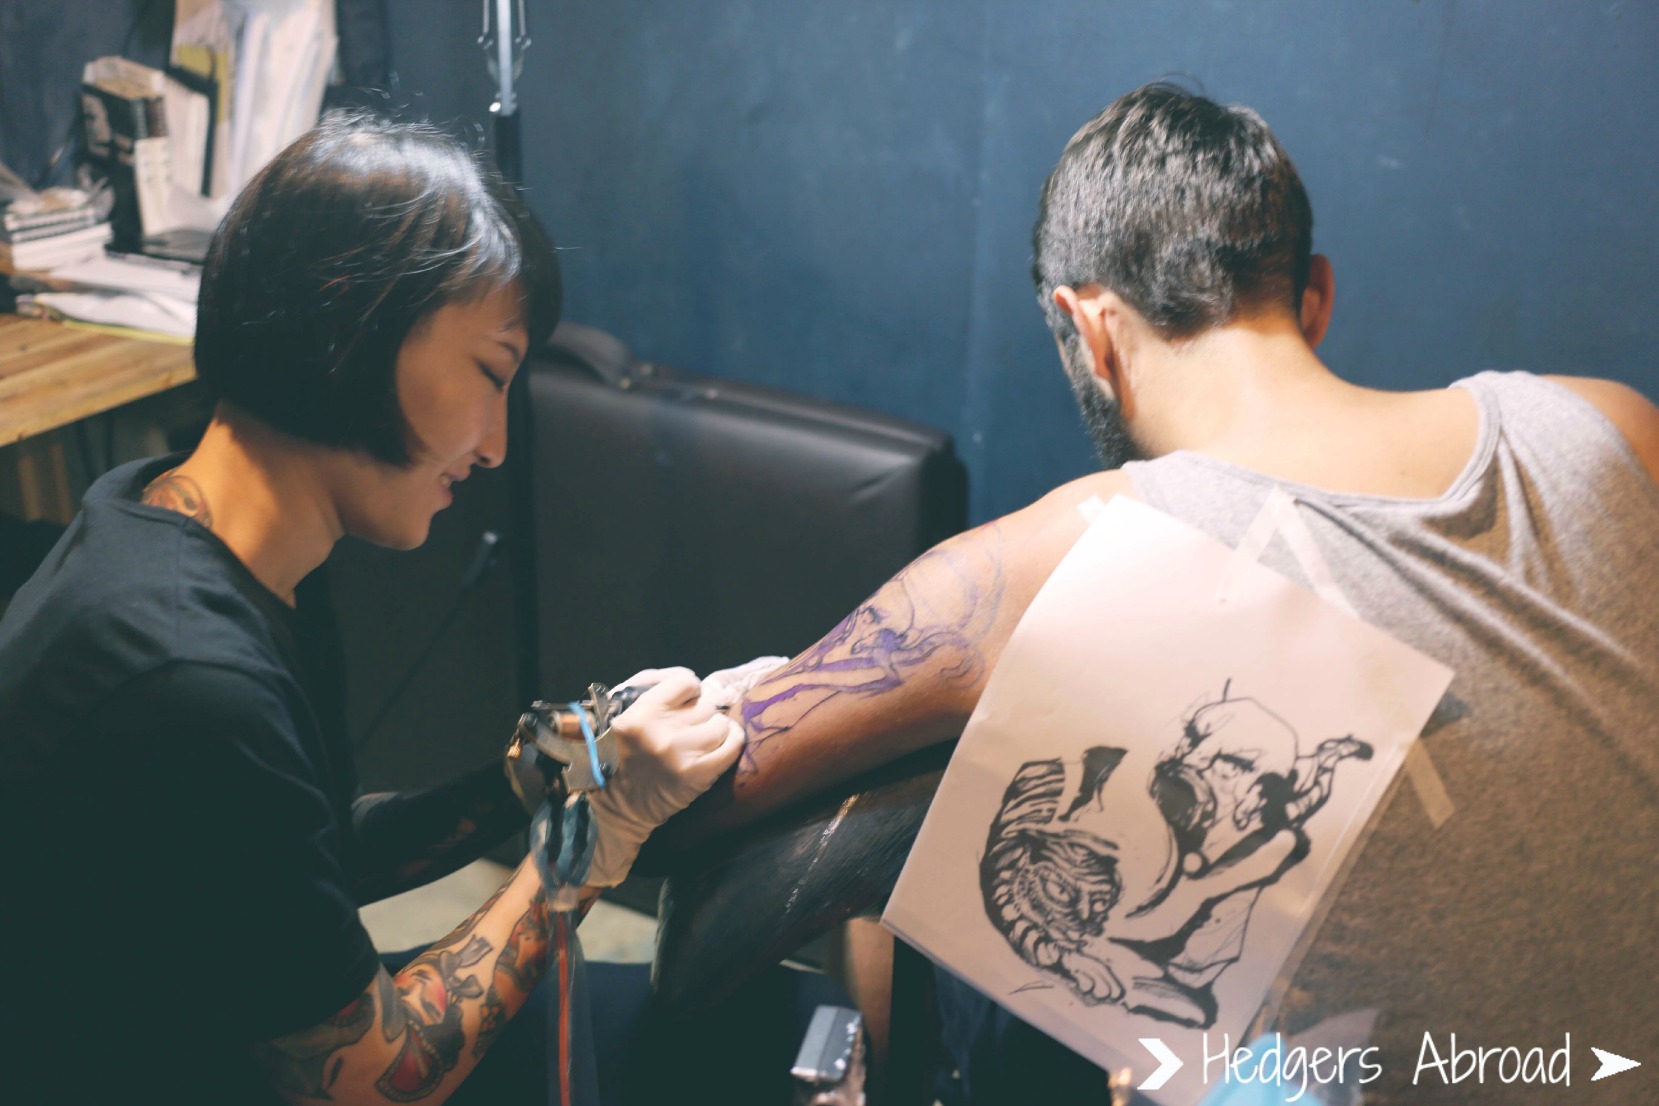 How much do tattoos cost in korea